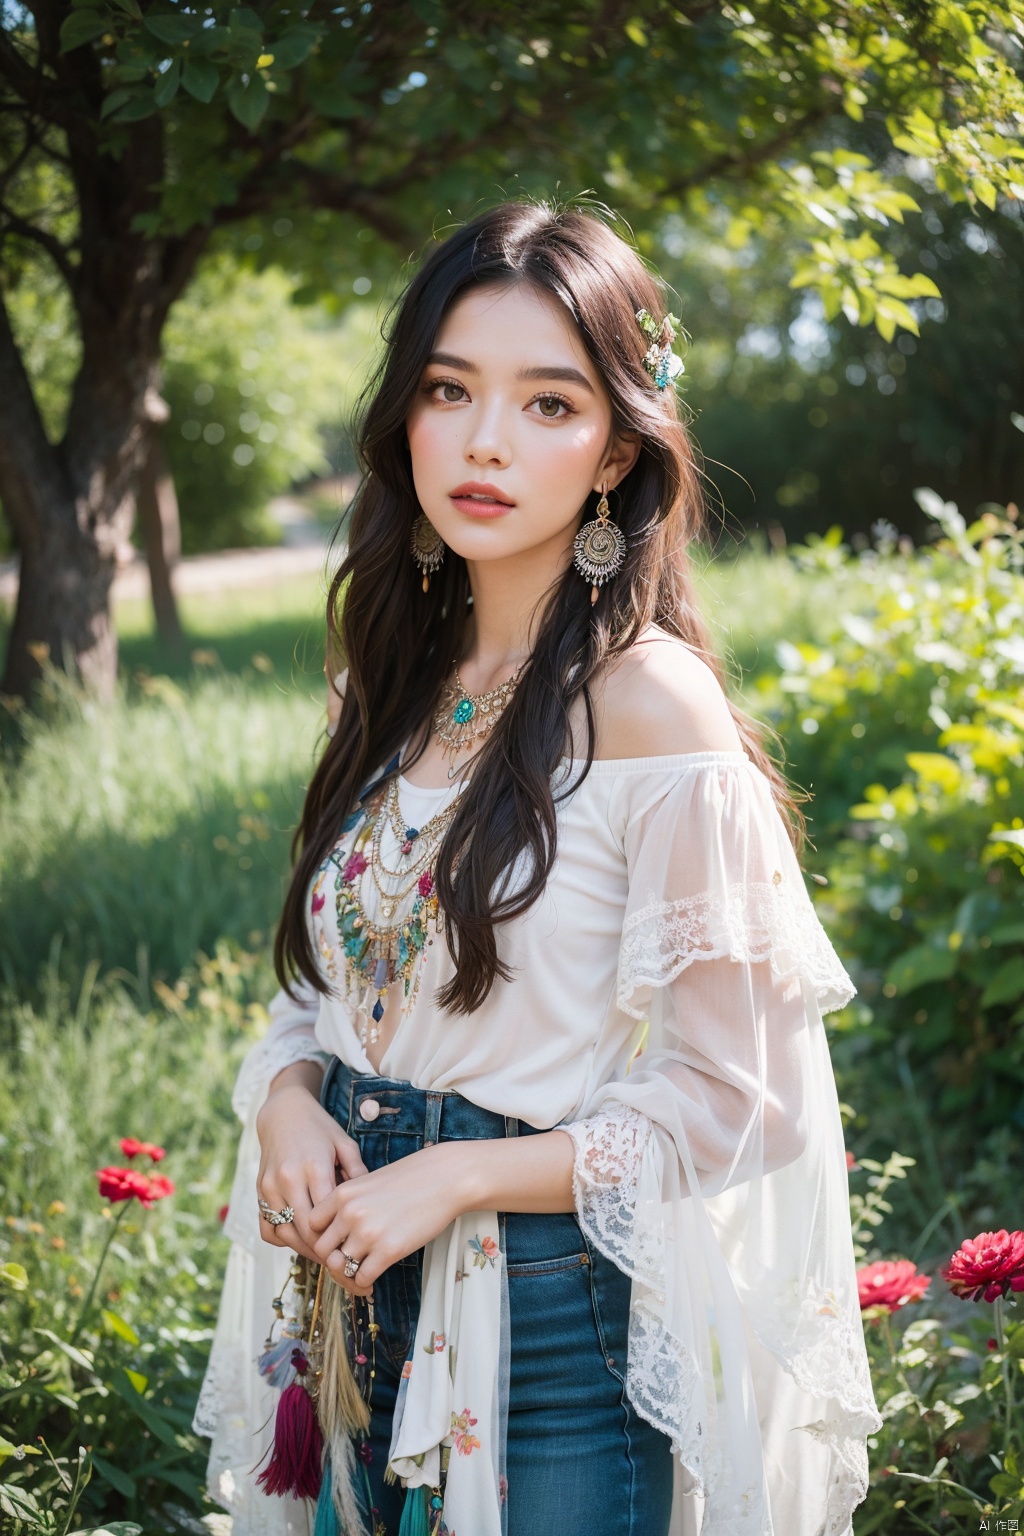 A bohemian style shoot, with a model in eclectic, boho-chic attire, surrounded by a lush garden filled with wildflowers and dreamcatchers. She wears flowy fabrics, fringe accents, and layered jewelry, embodying a free-spirited and artistic vibe.